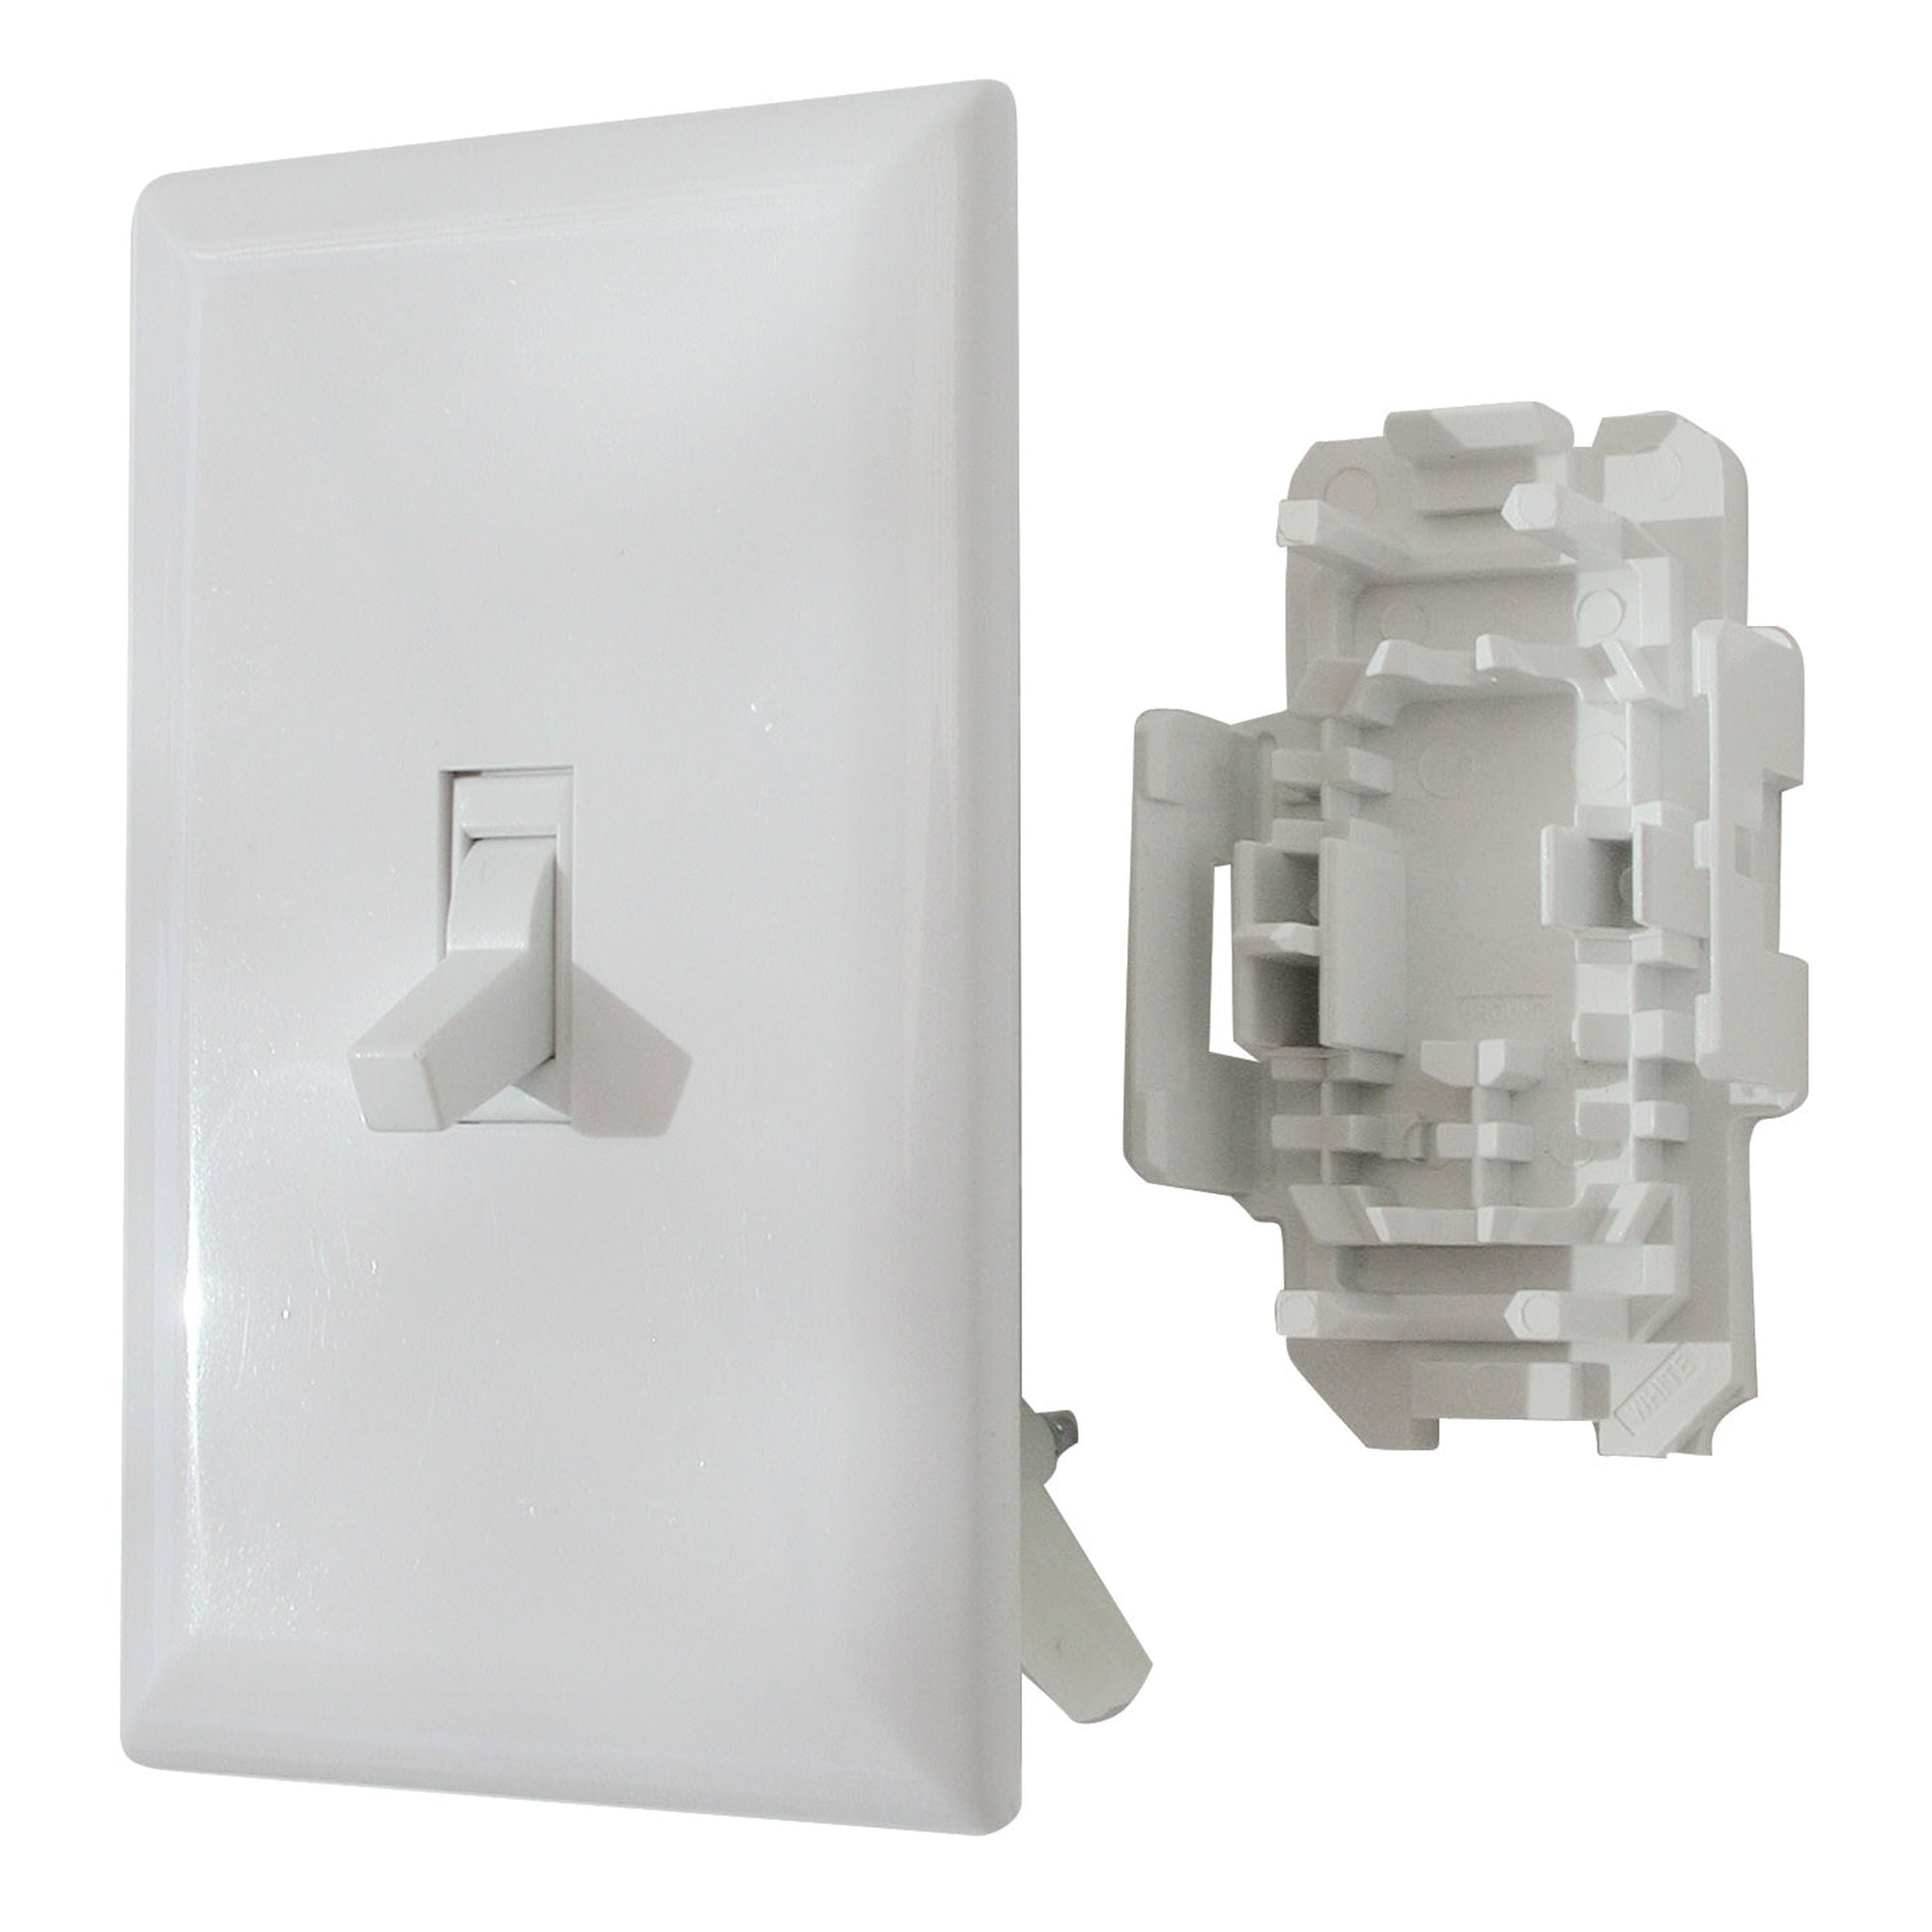 Diamond Group by Valterra DG151TVP Speed Box Toggle Switch with Cover - 15A, 125V, White